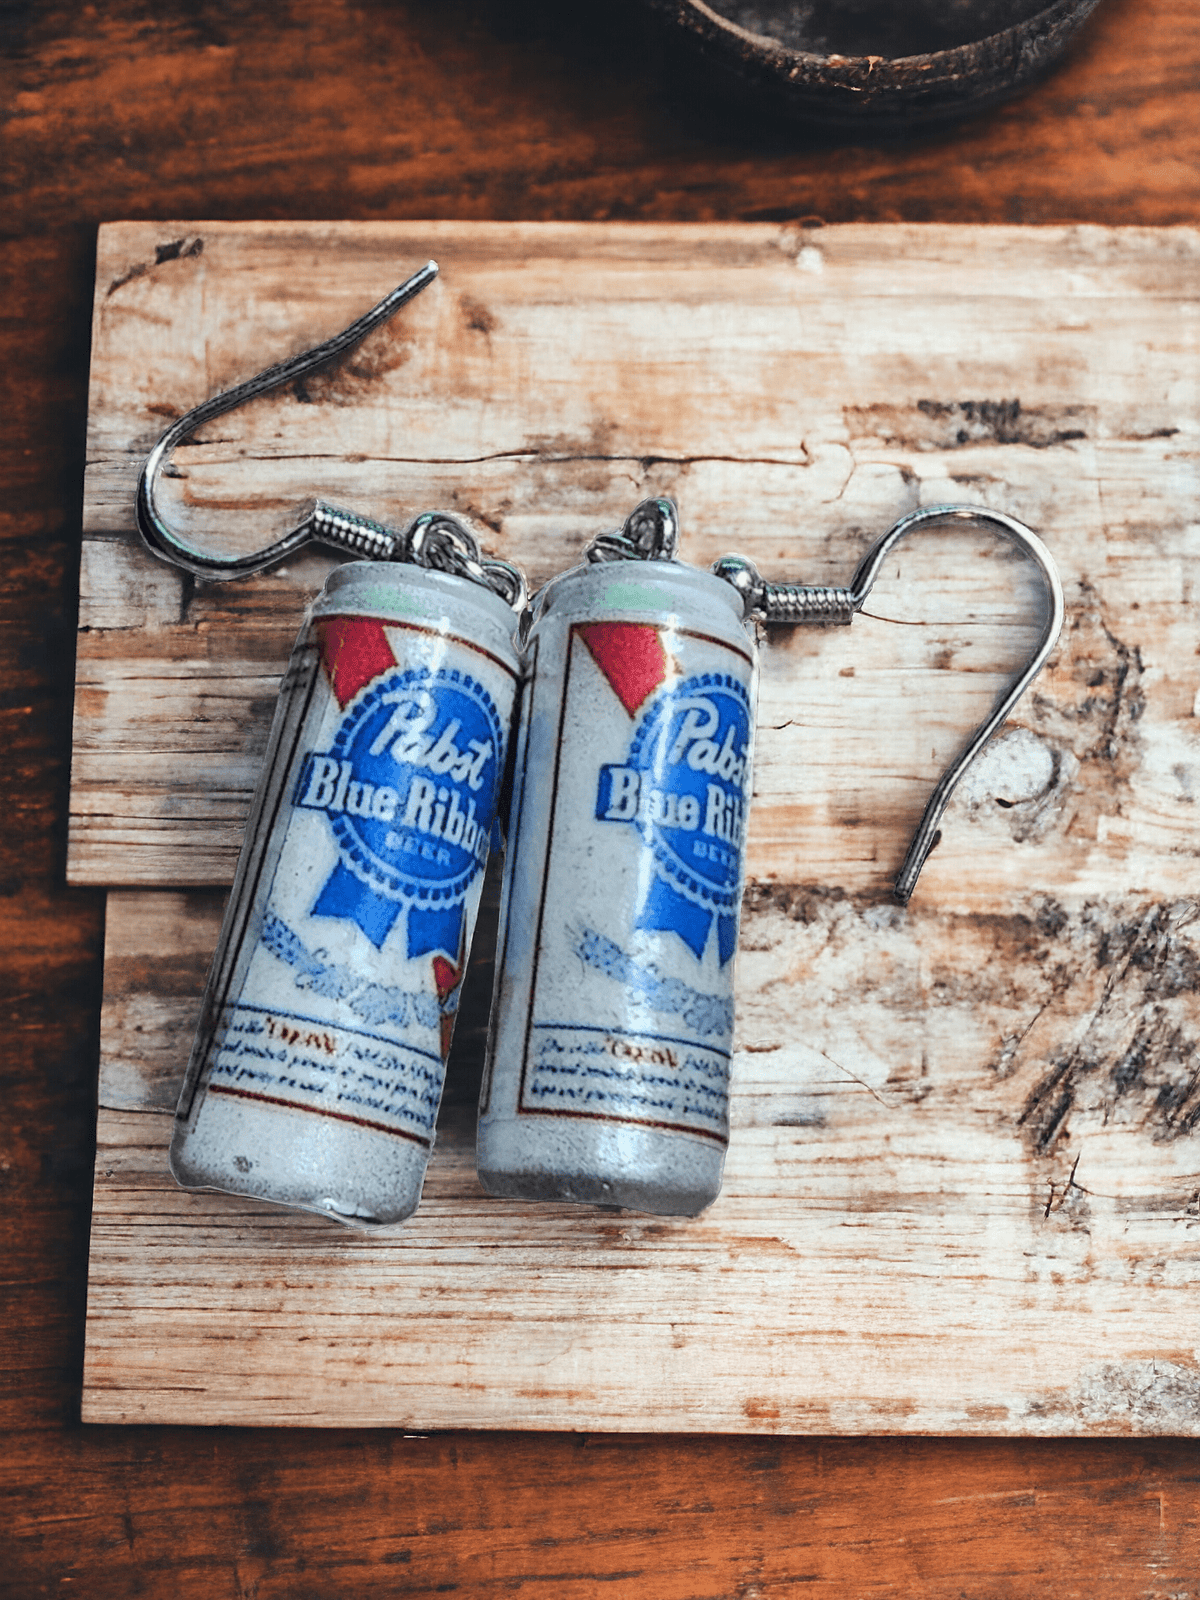 Handcrafted PBR-Inspired Earrings - The People's Beer Fashion Statement - Unique Pabst Blue Ribbon Beer Design Jewelry